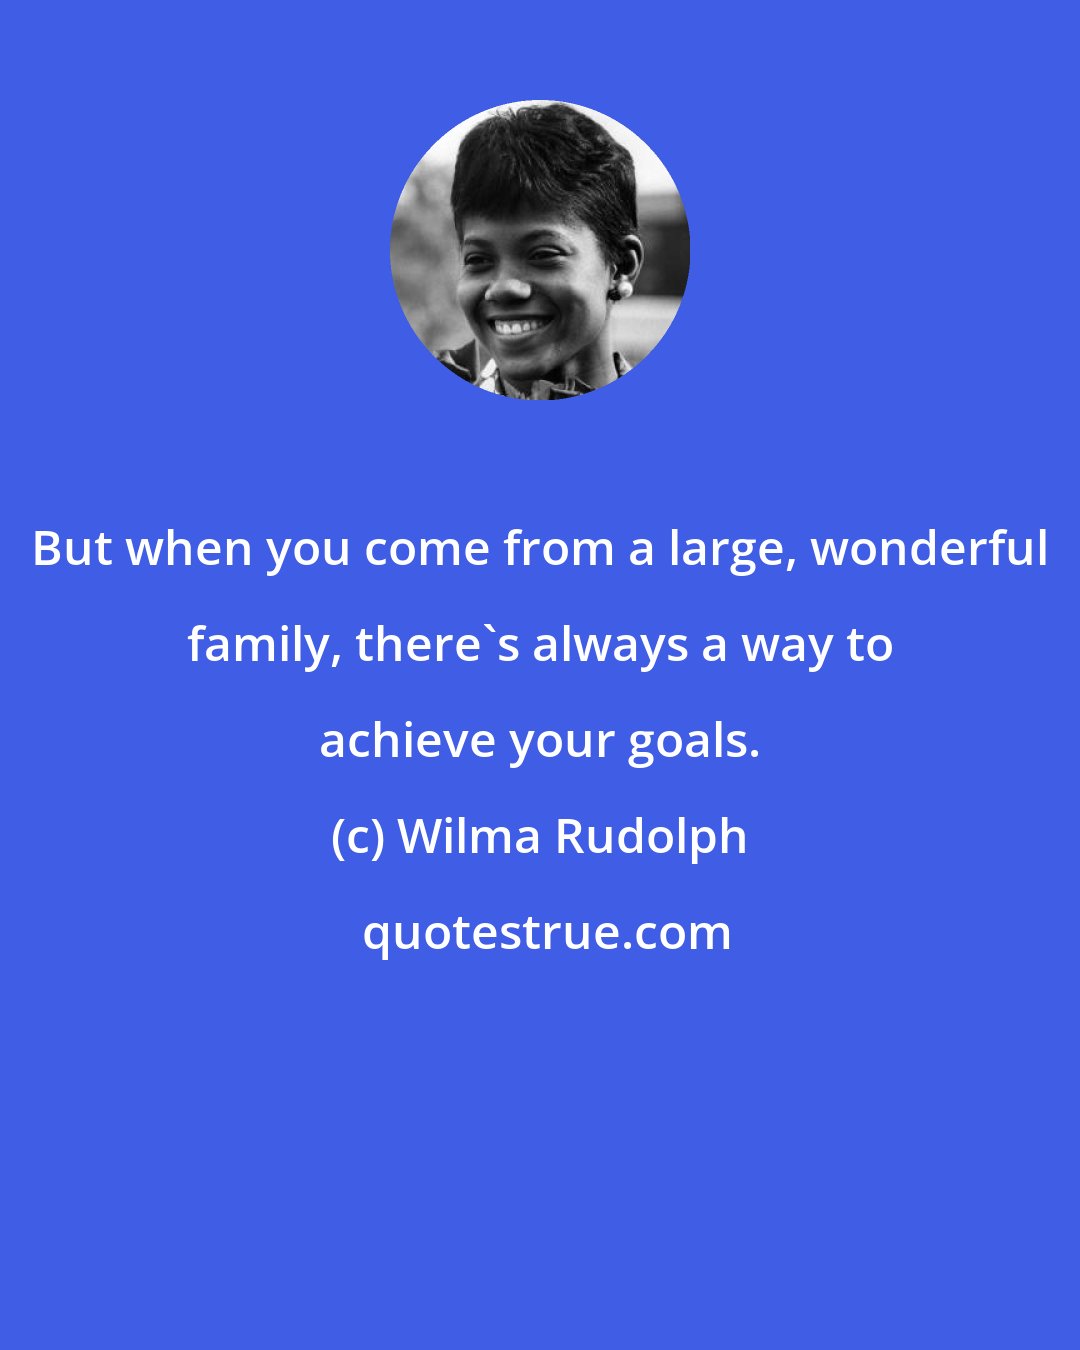 Wilma Rudolph: But when you come from a large, wonderful family, there's always a way to achieve your goals.